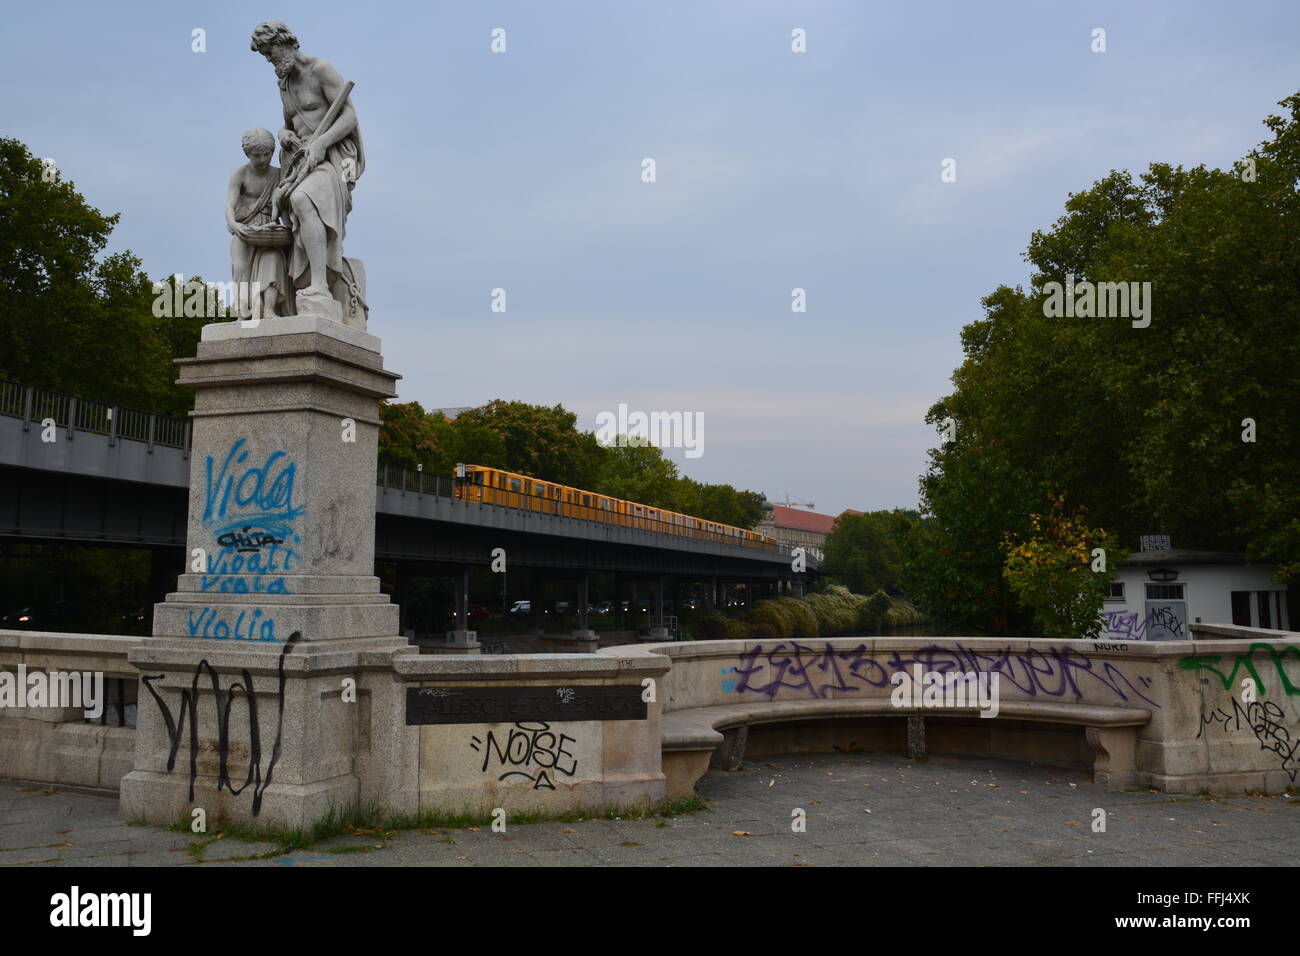 Graffiti covers a railing, bench, and statue base next to a train stop in Berlin, Germany. Stock Photo